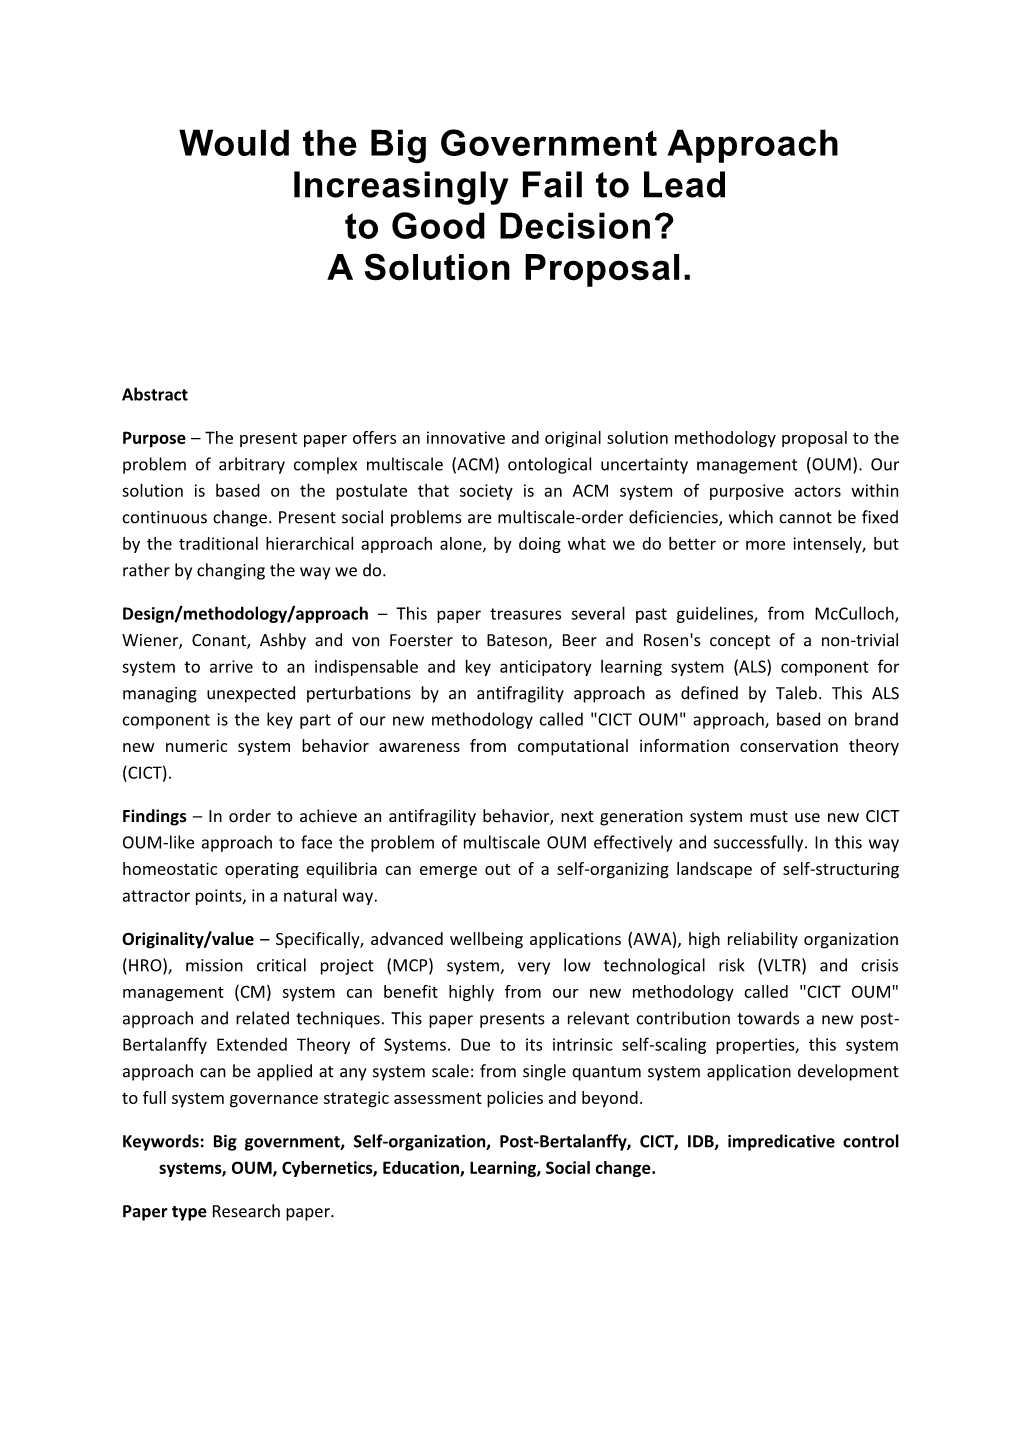 A Solution Proposal